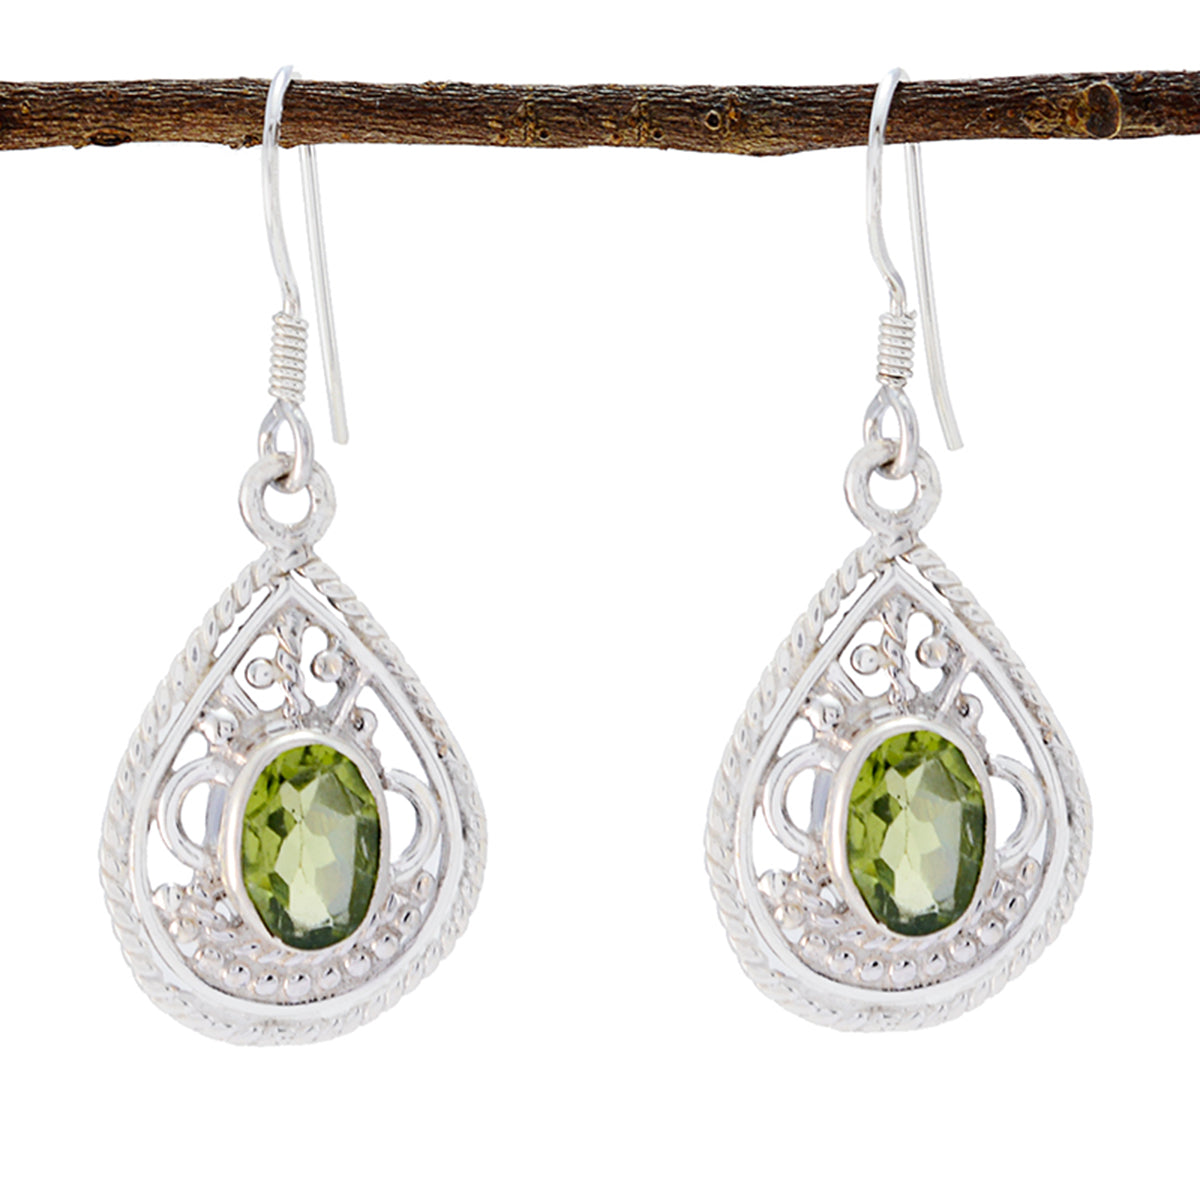 Riyo Genuine Gems oval Faceted Green Peridot Silver Earring gift for college